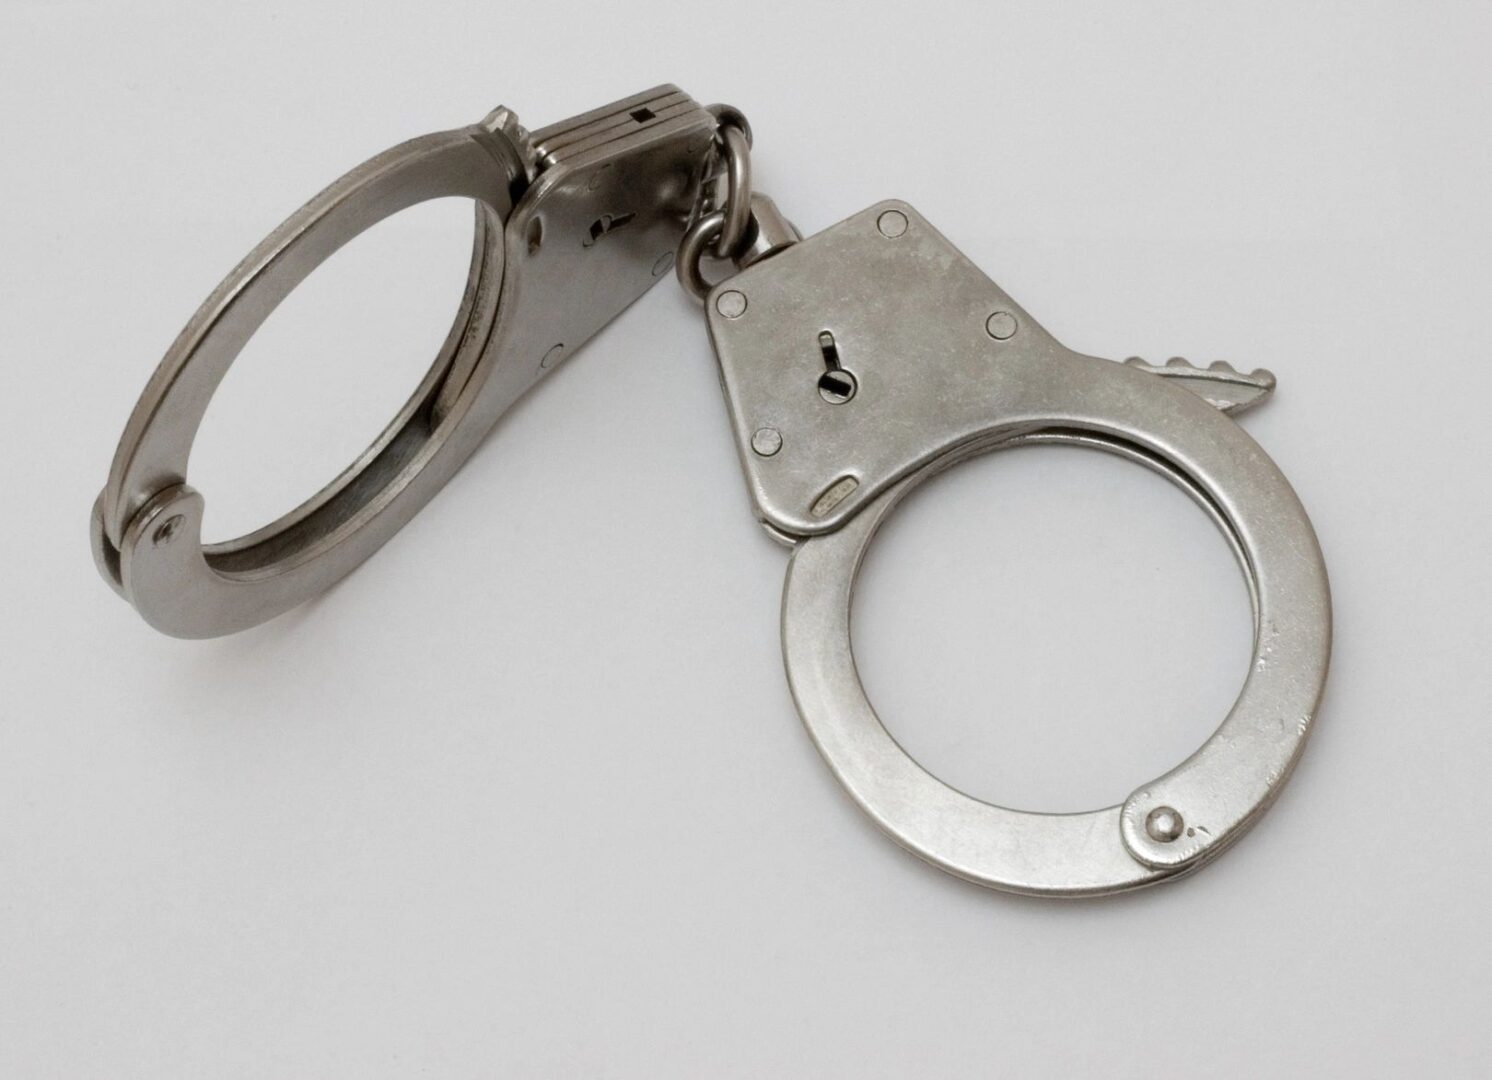 A pair of handcuffs with a key on top.